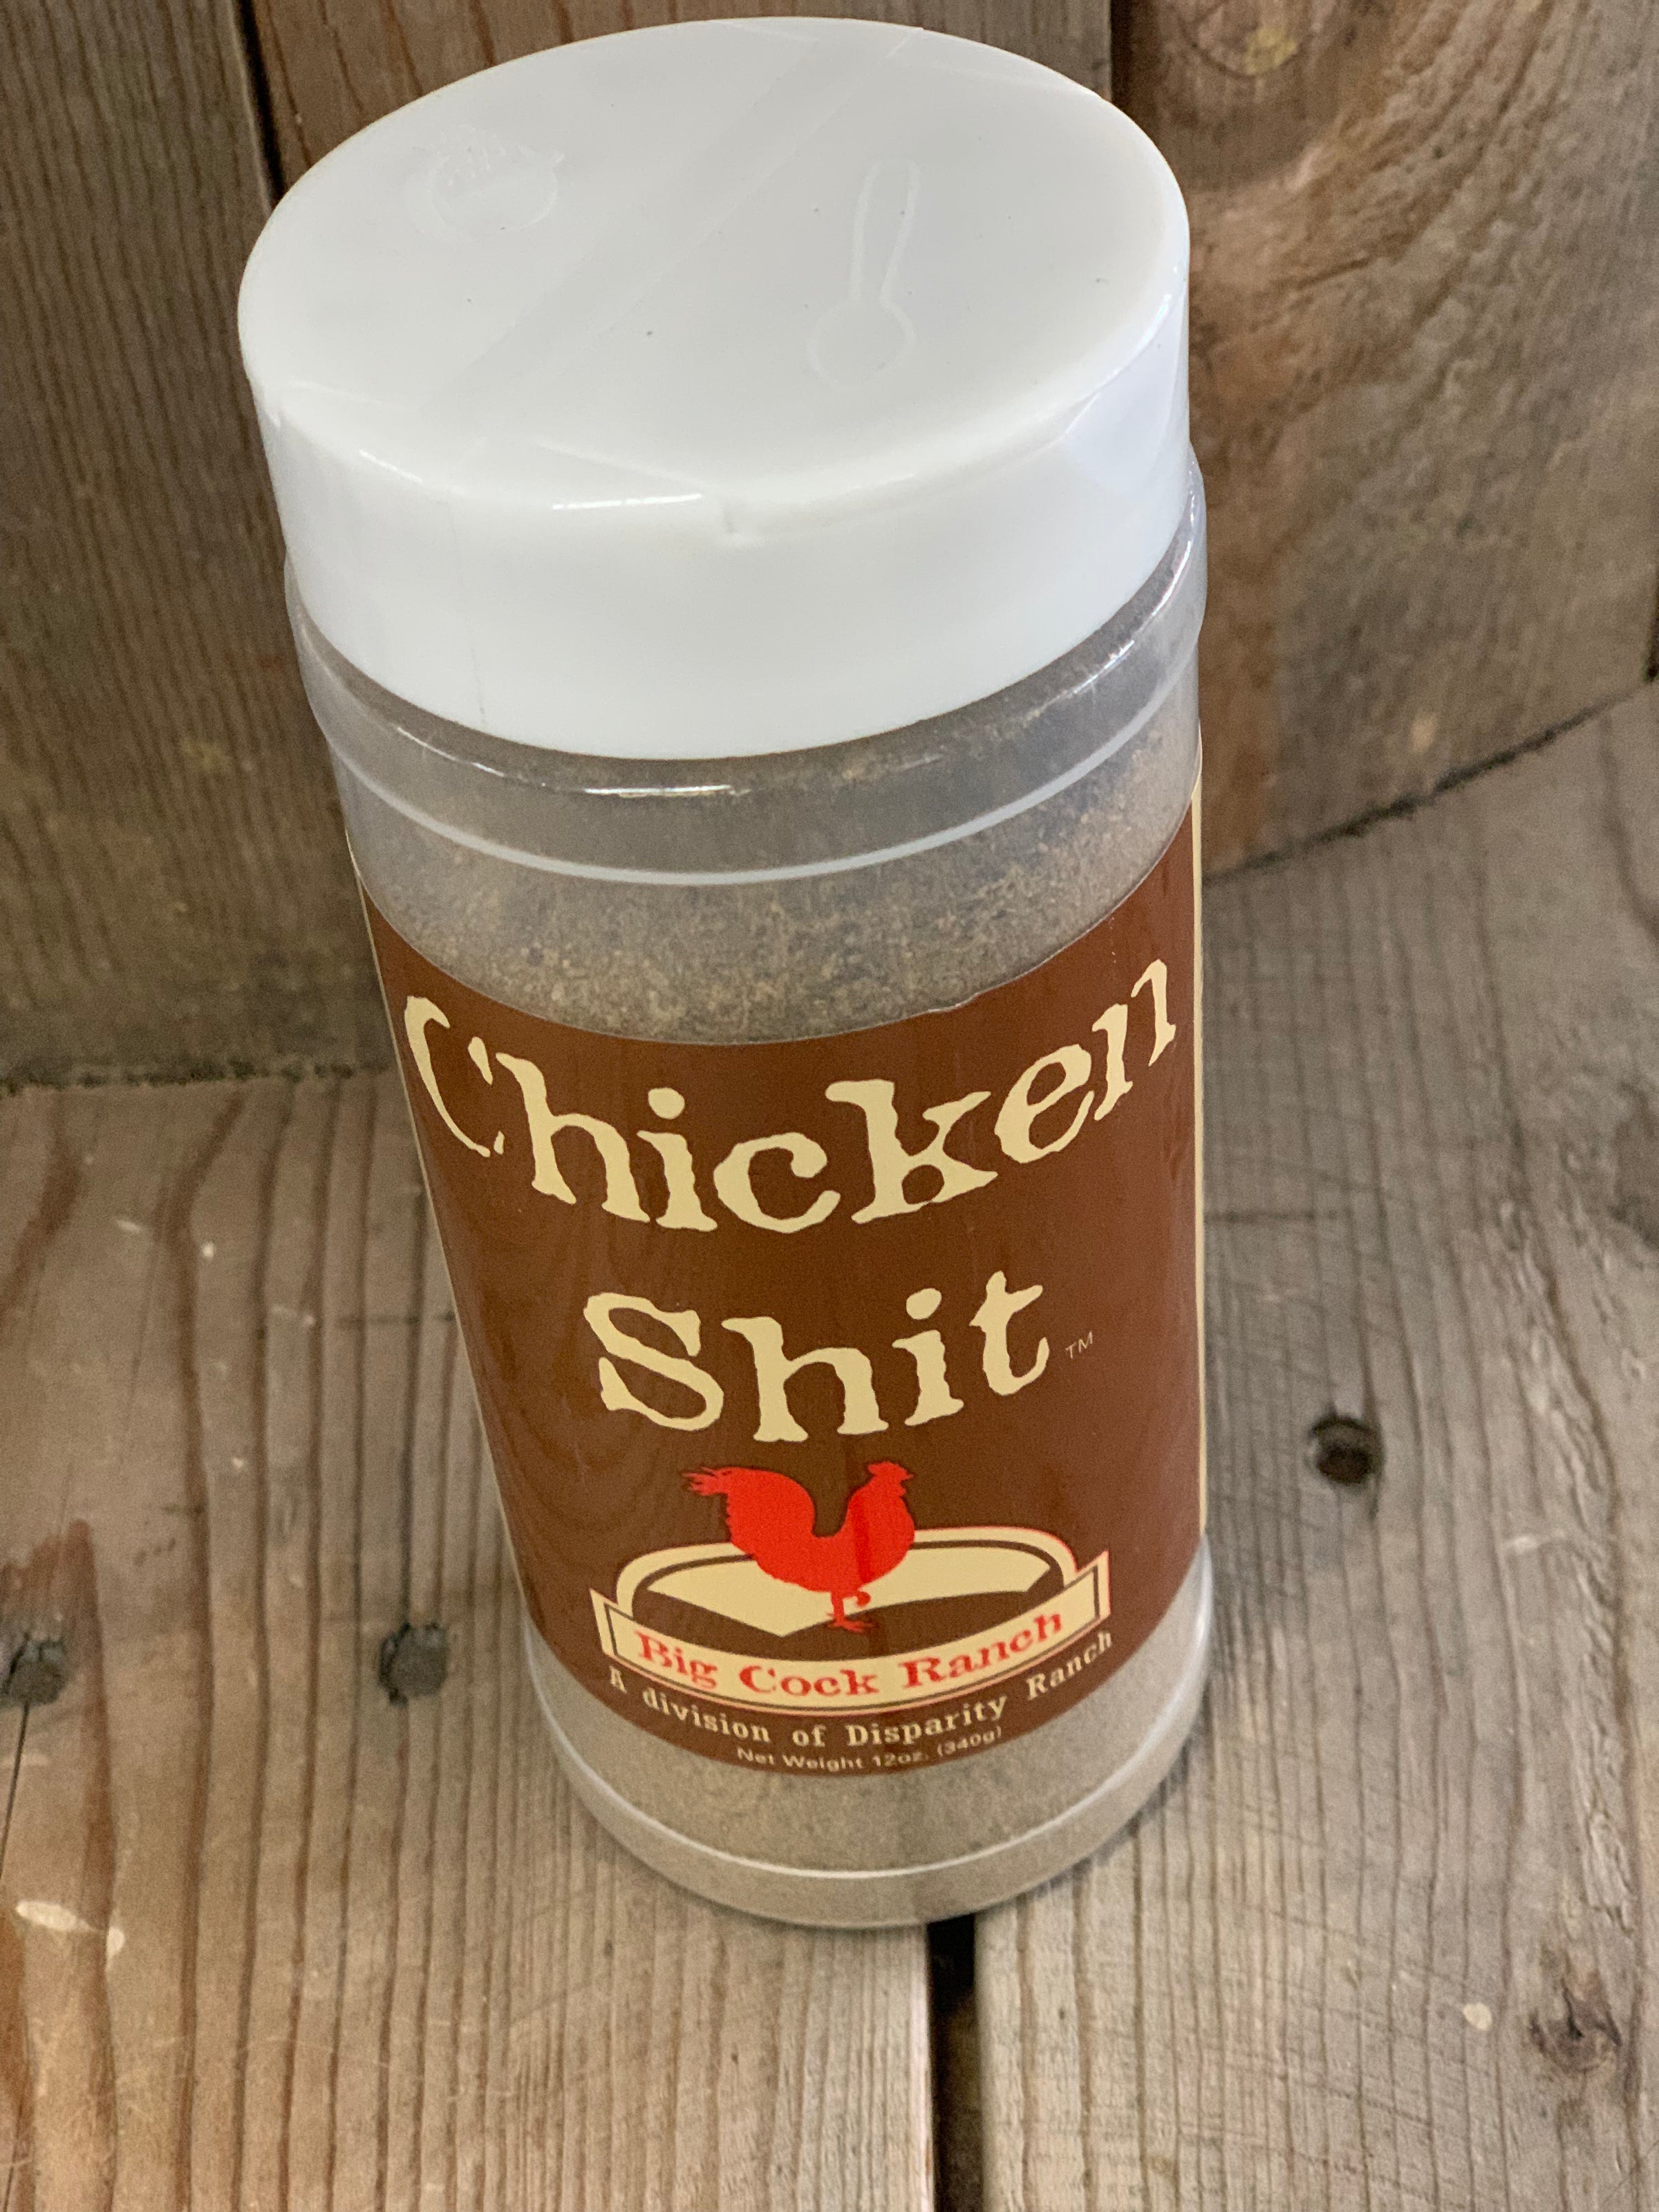 Chicken Shit-Shit Rubs – OkieSpice and Trade Co